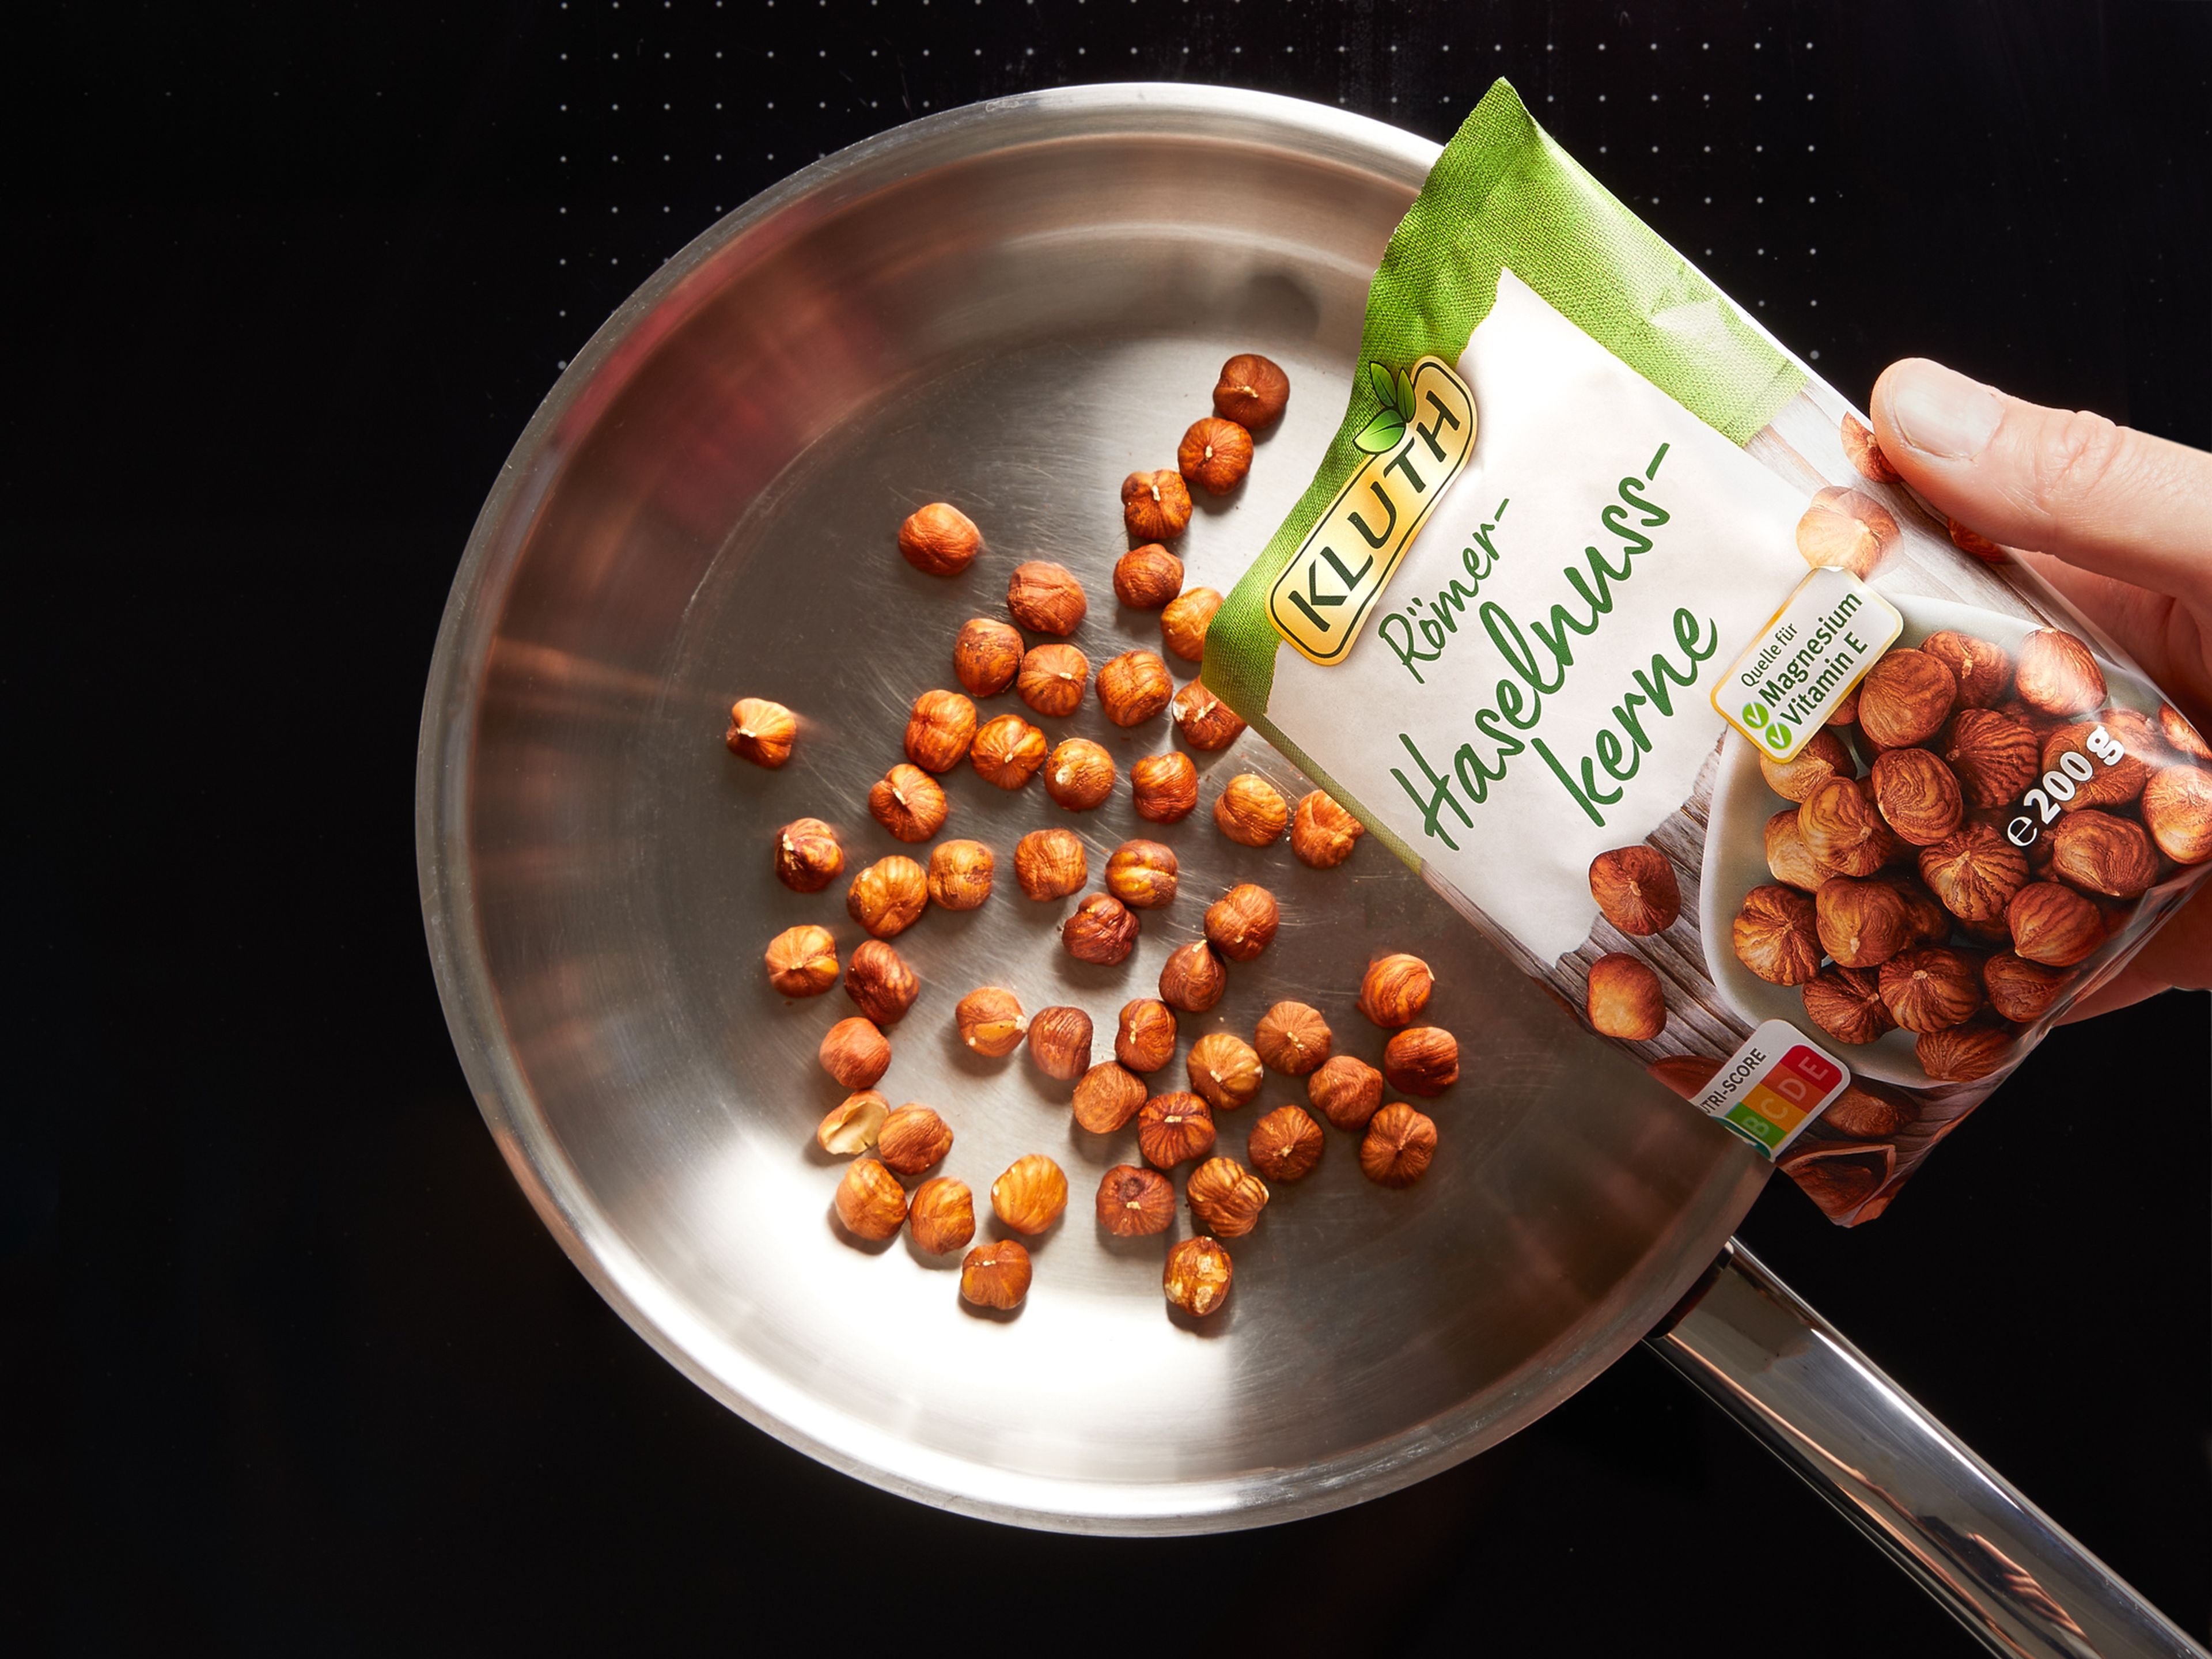 Toast hazelnuts in a small frying pan over medium heat until fragrant, approx. 4 min. Finely chop and set aside.